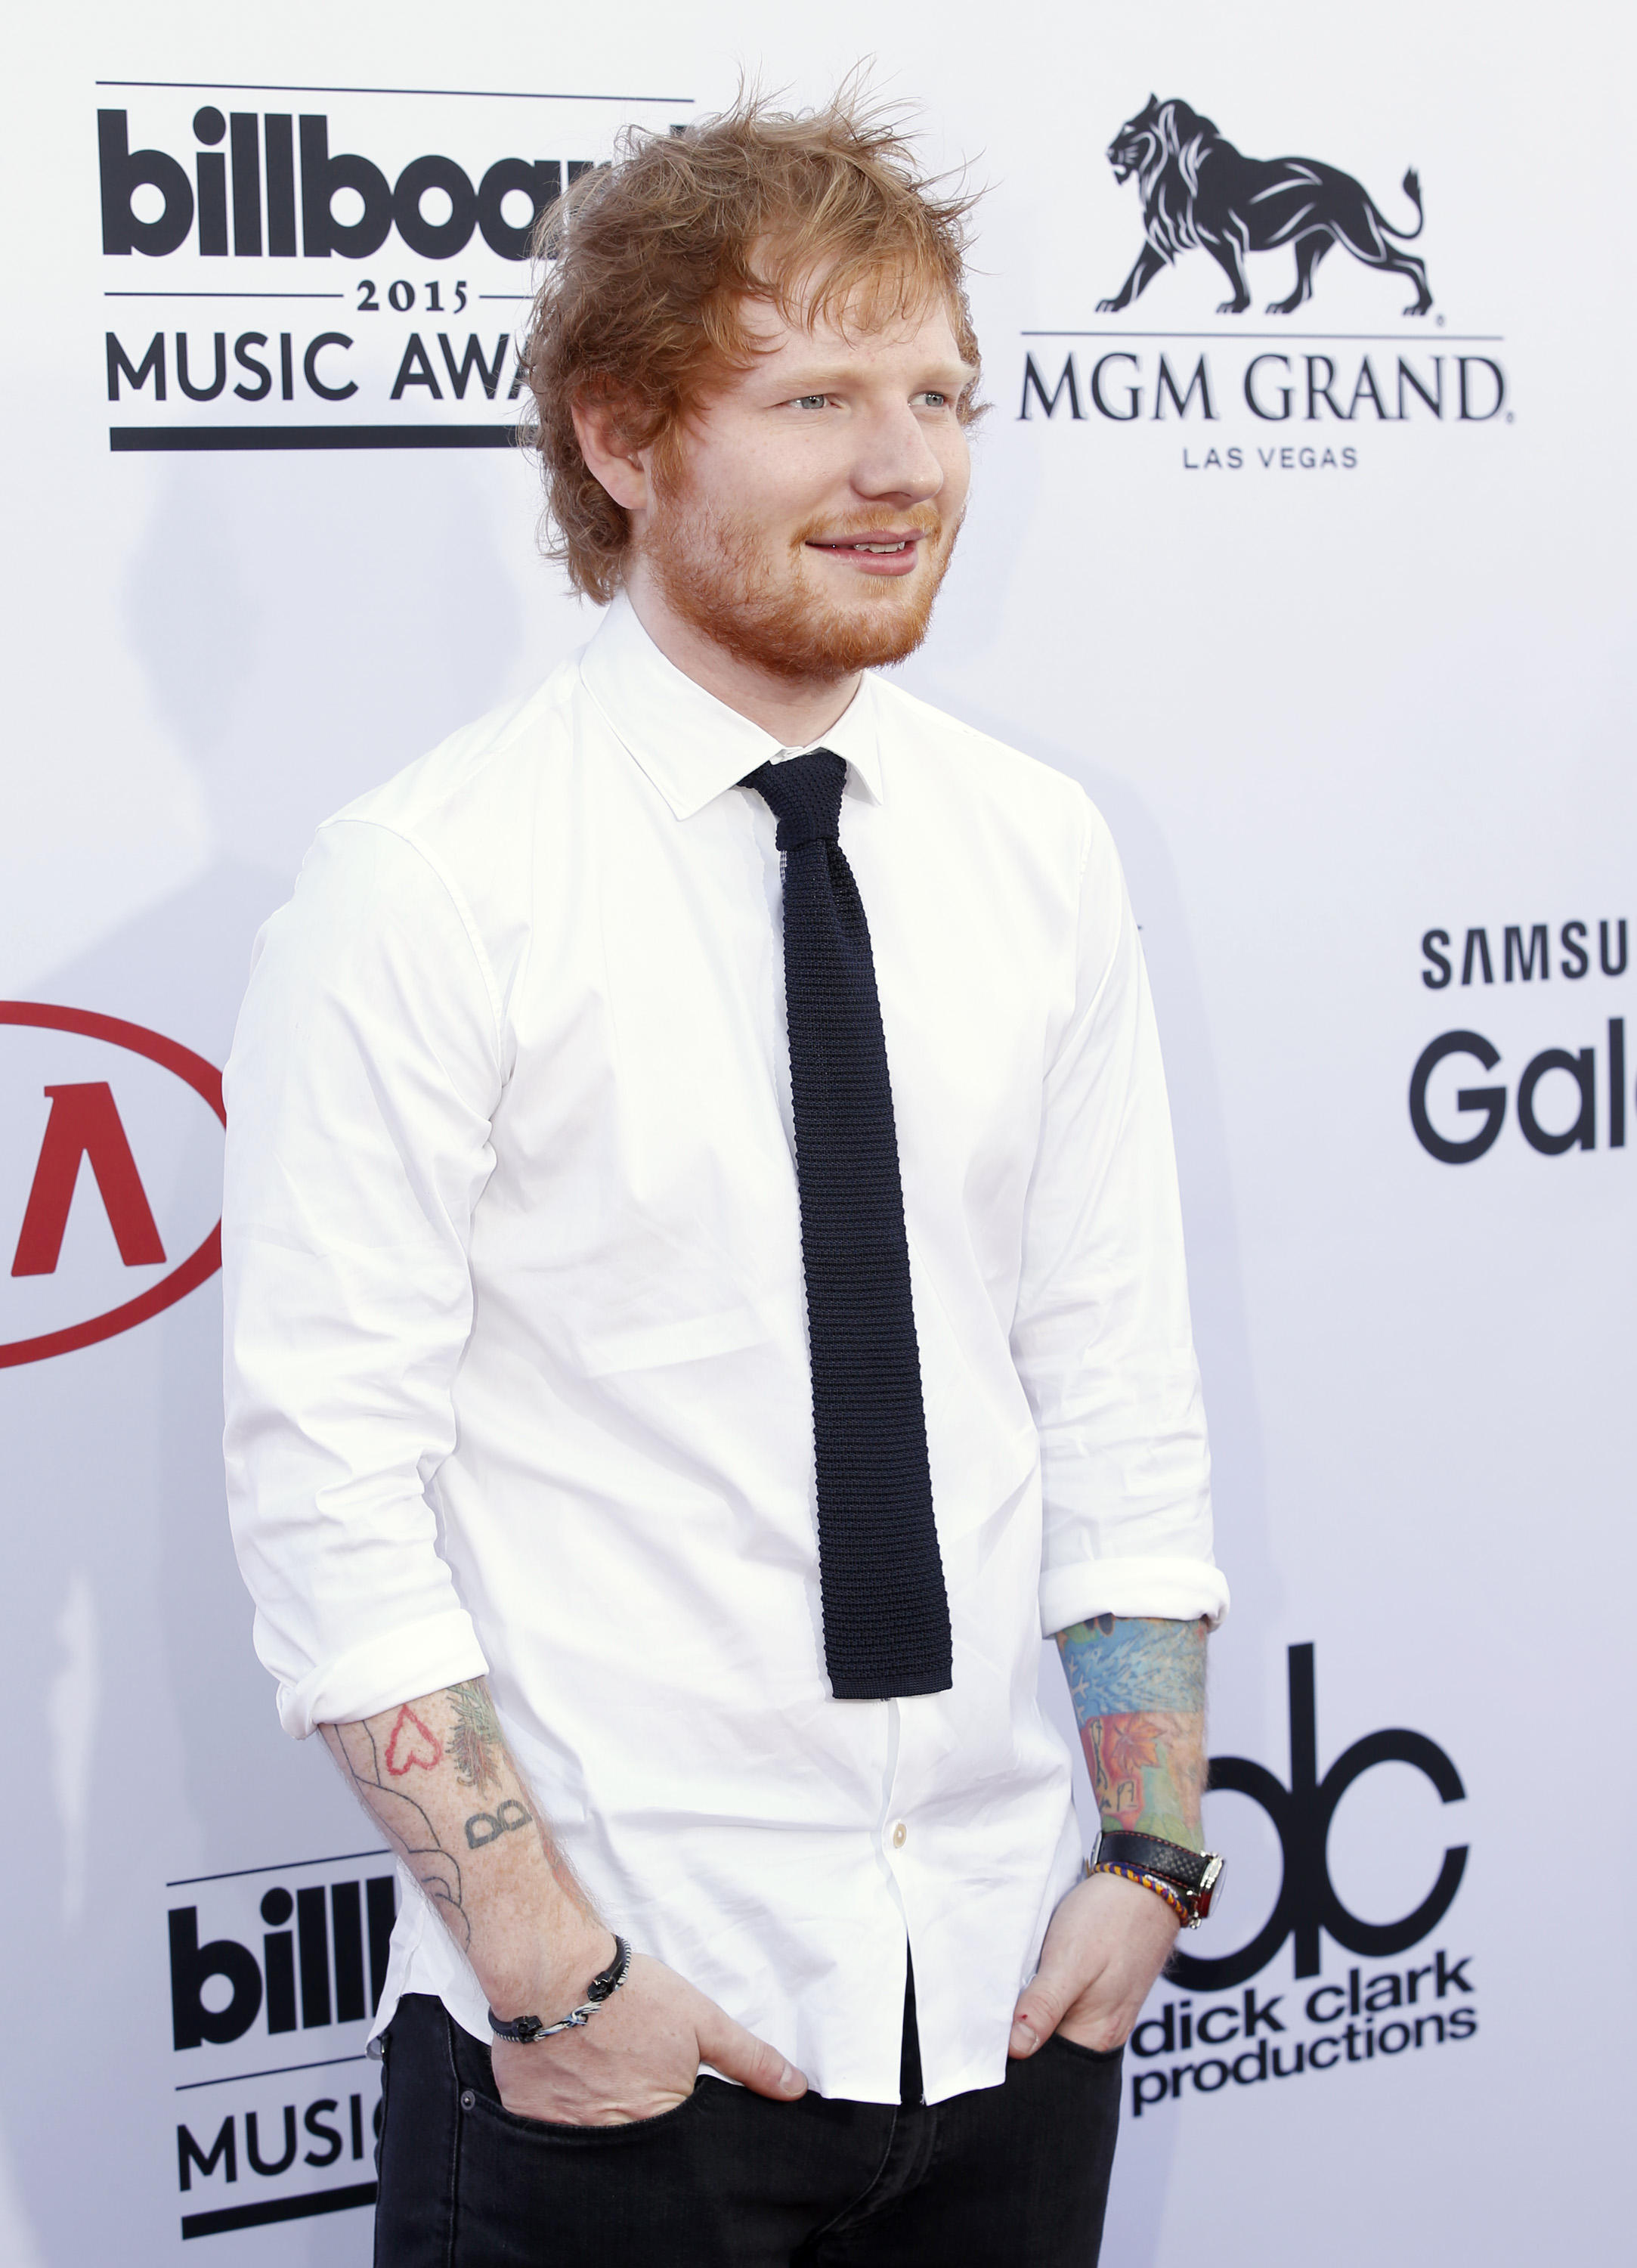 Ed Sheeran arrives at the Billboard Music Awards at the MGM Grand Garden Arena on Sunday, May 17, 2015, in Las Vegas. (Photo by Eric Jamison/Invision/AP)